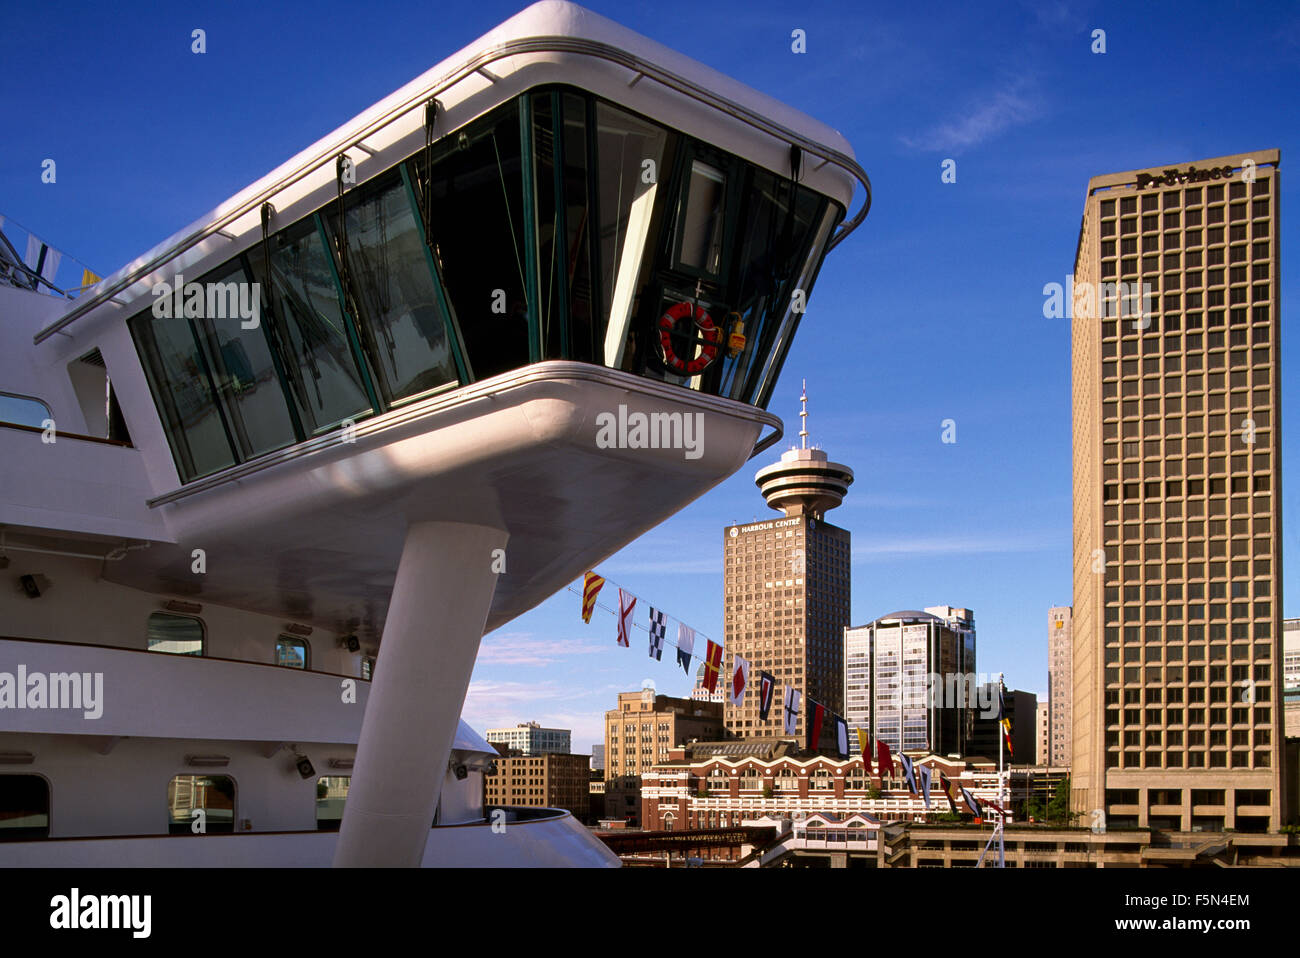 Vancouver, BC, British Columbia, Canada - Bridge Deck of Cruise Ship overlooking Downtown Office Buildings Stock Photo